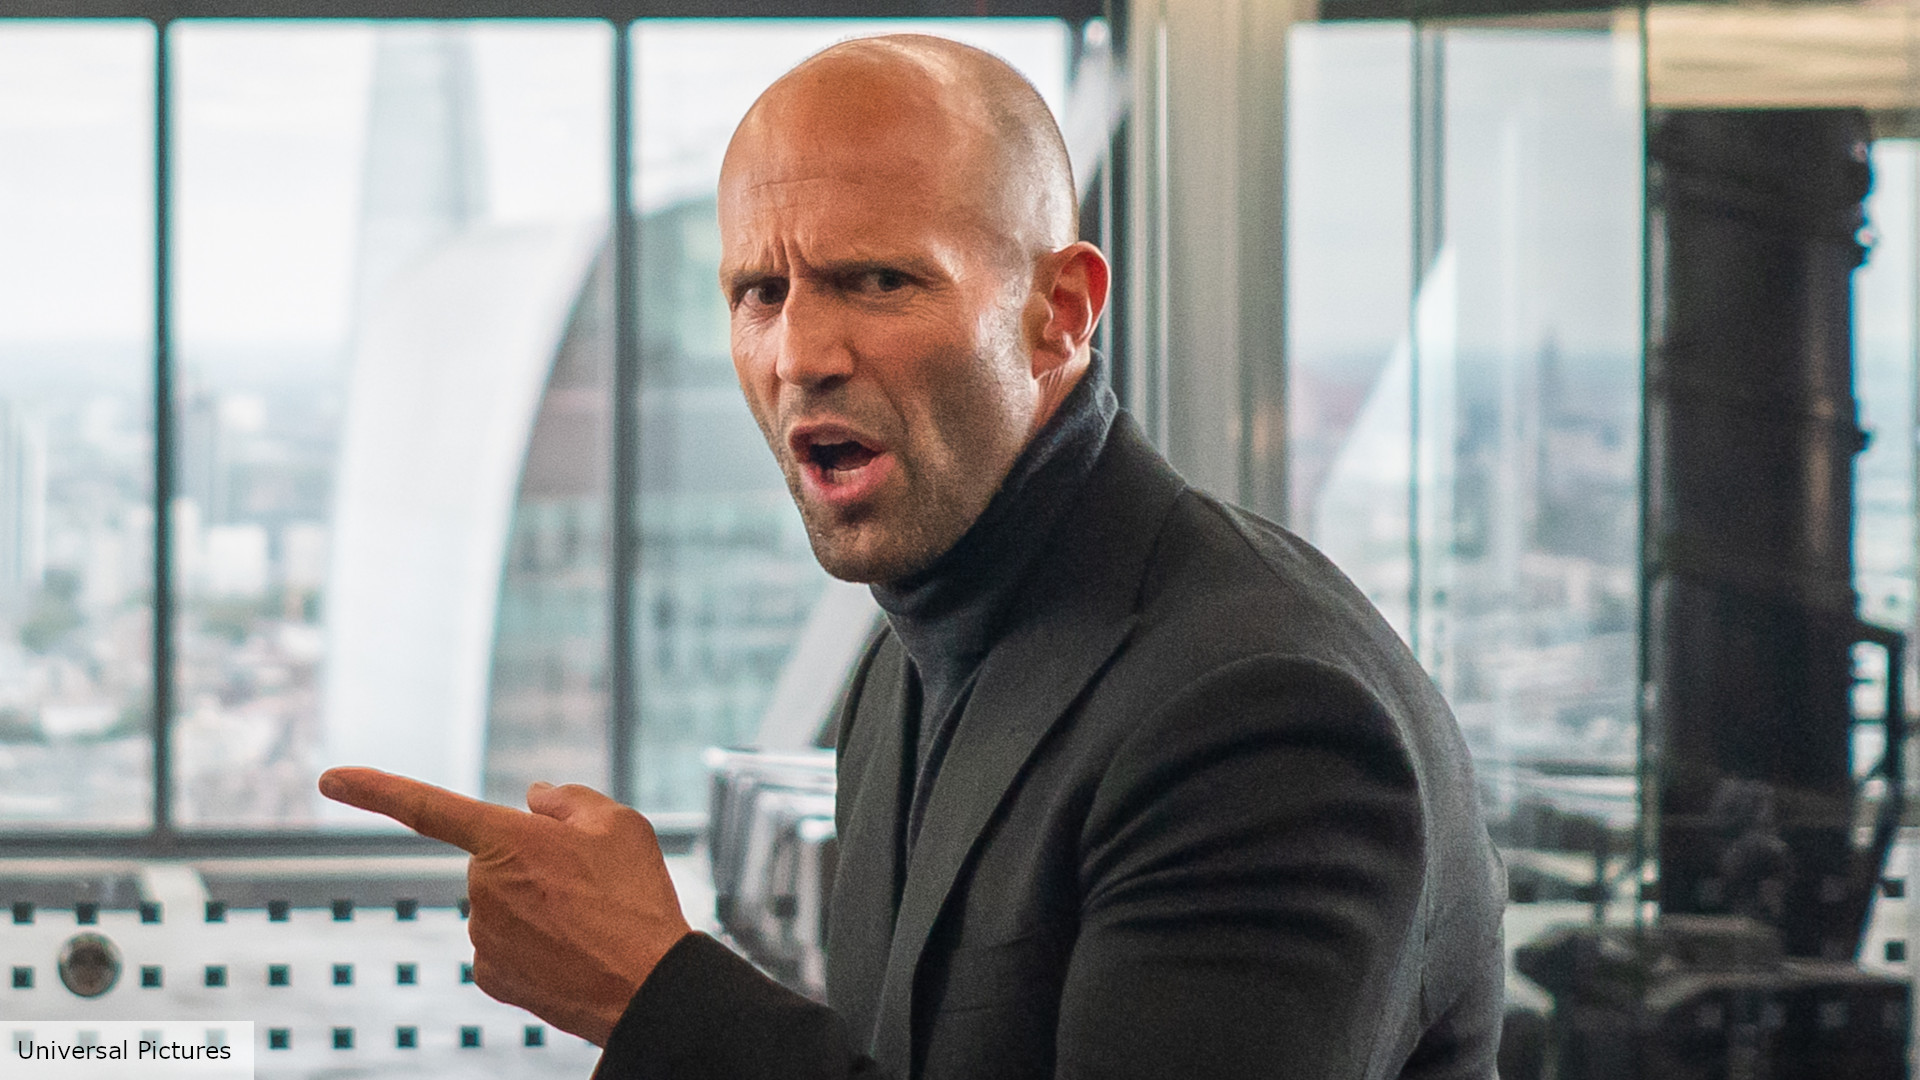 Jason Statham says Fast and Furious co-star was “director's nightmare” | The Digital Fix